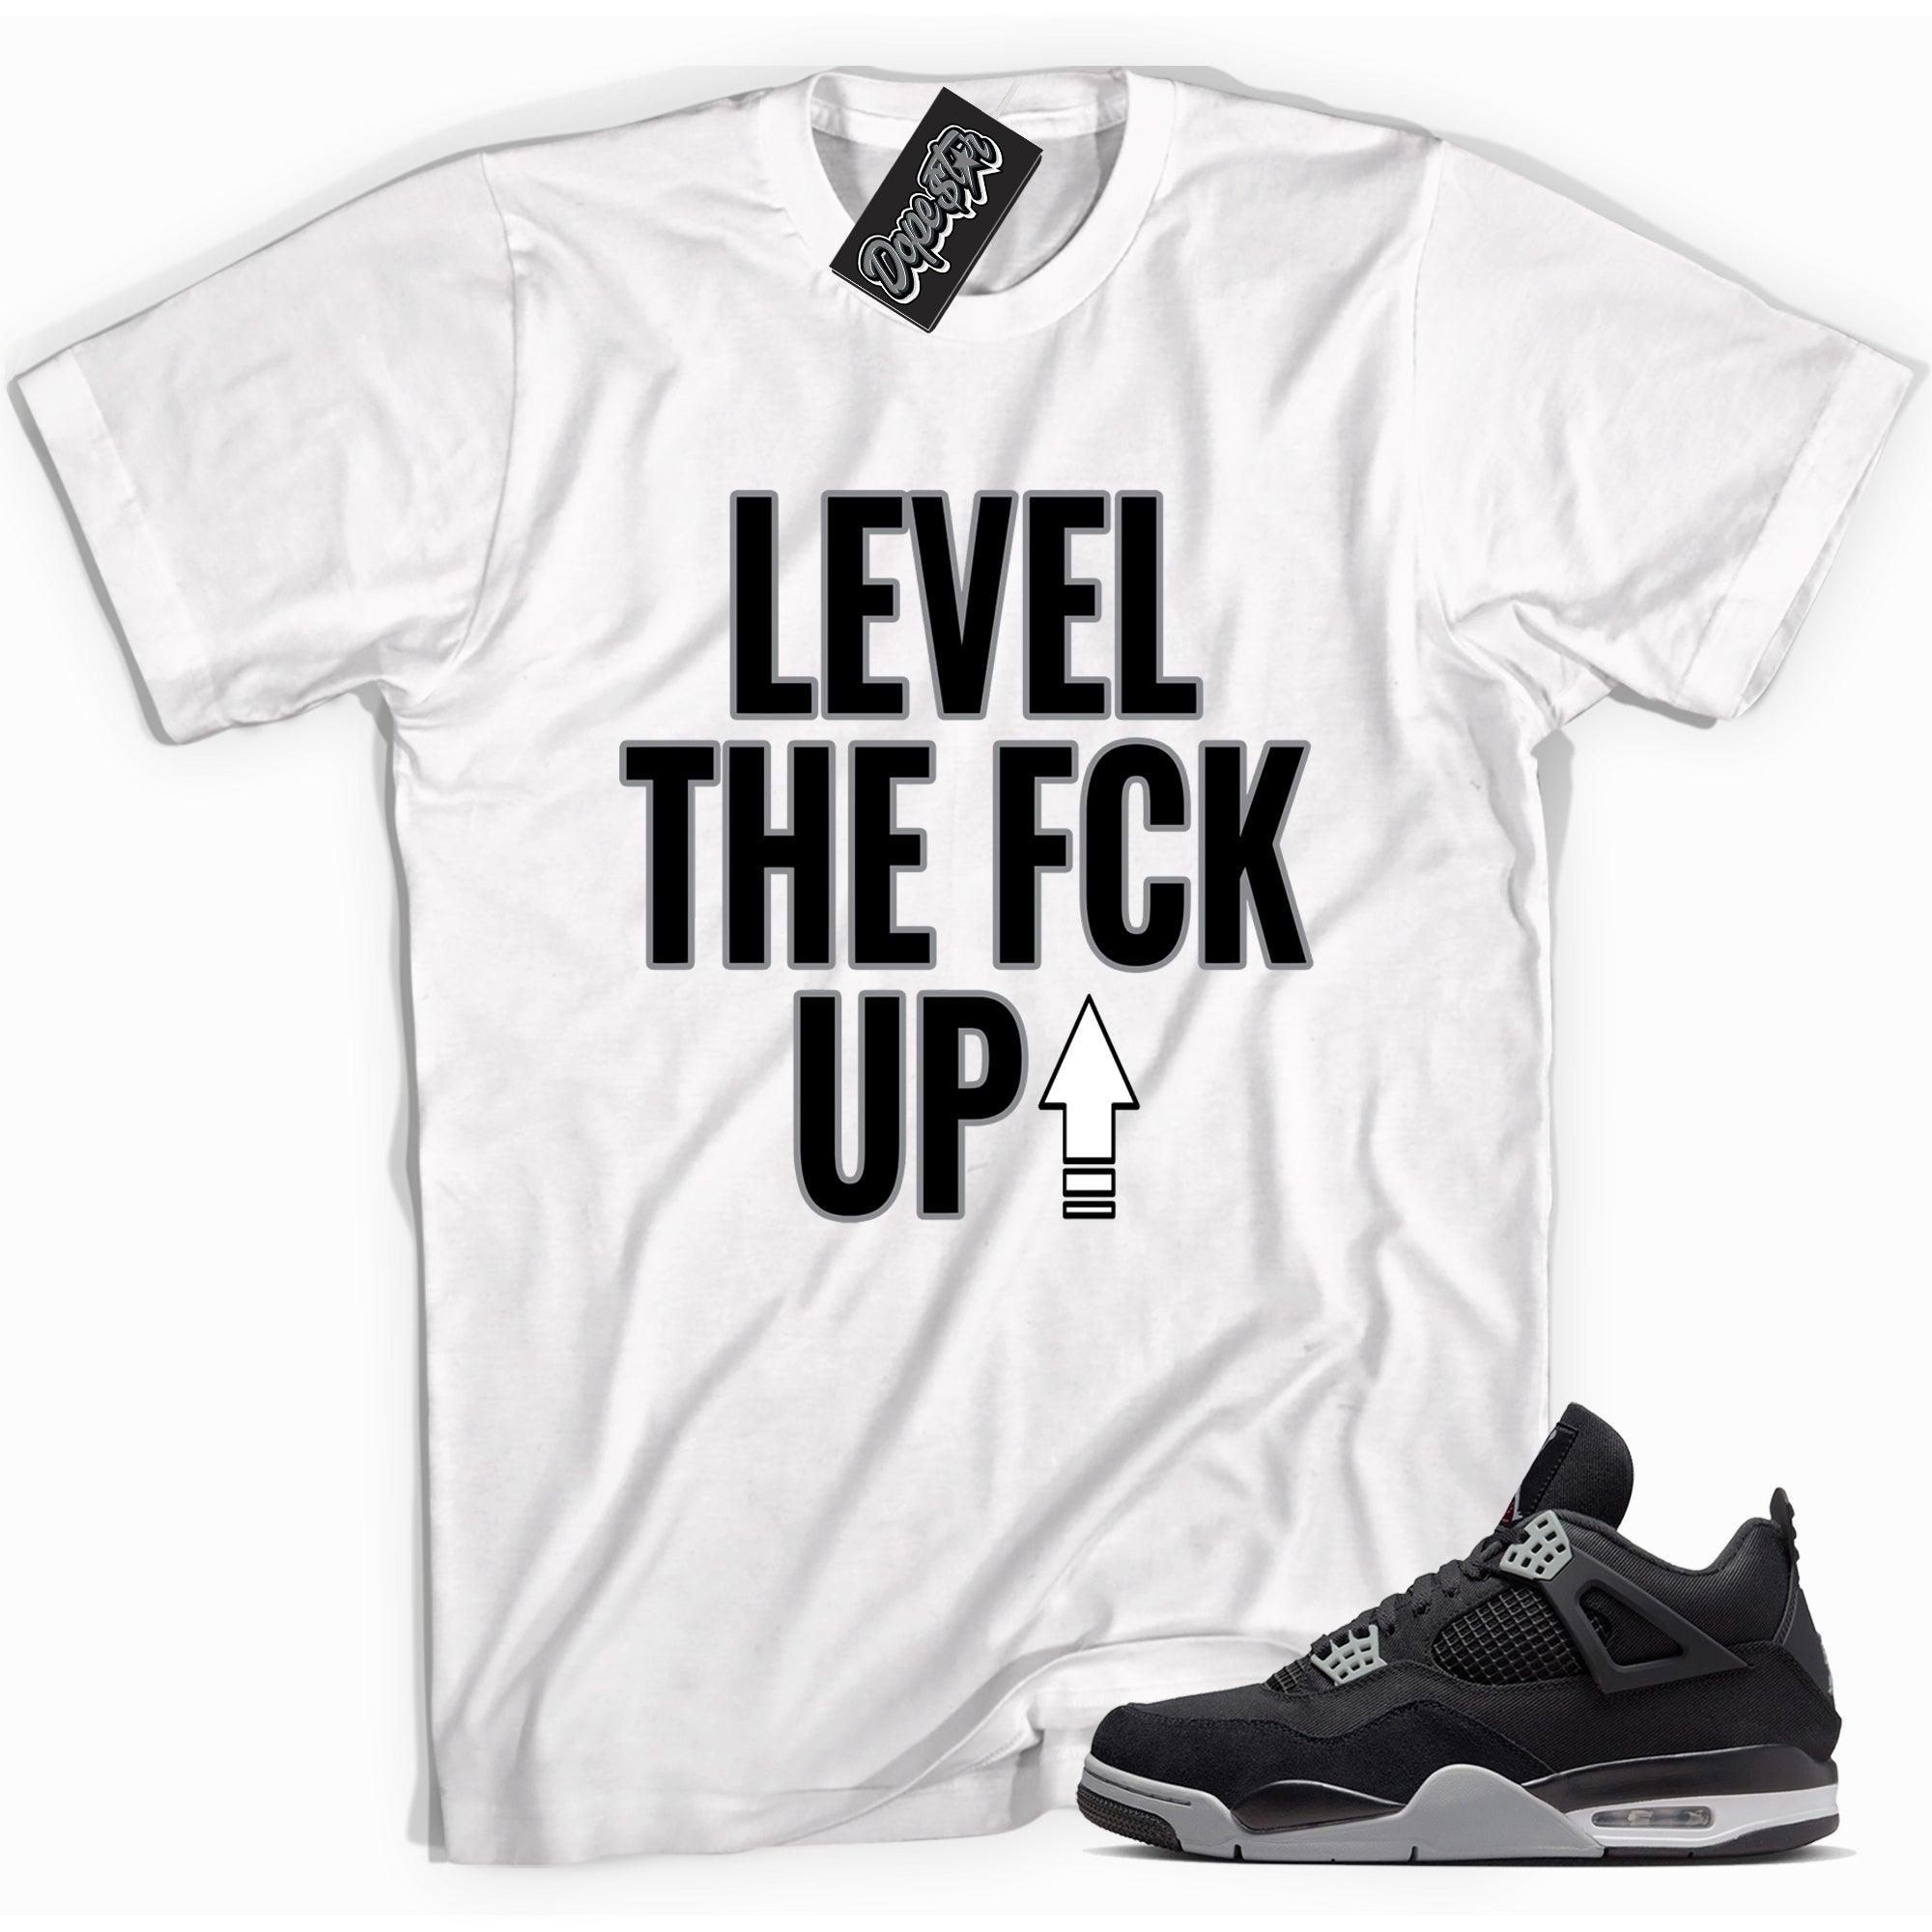 Cool white graphic tee with 'Level Up' print, that perfectly matches Air Jordan 4 Retro SE Black Canvas sneakers.